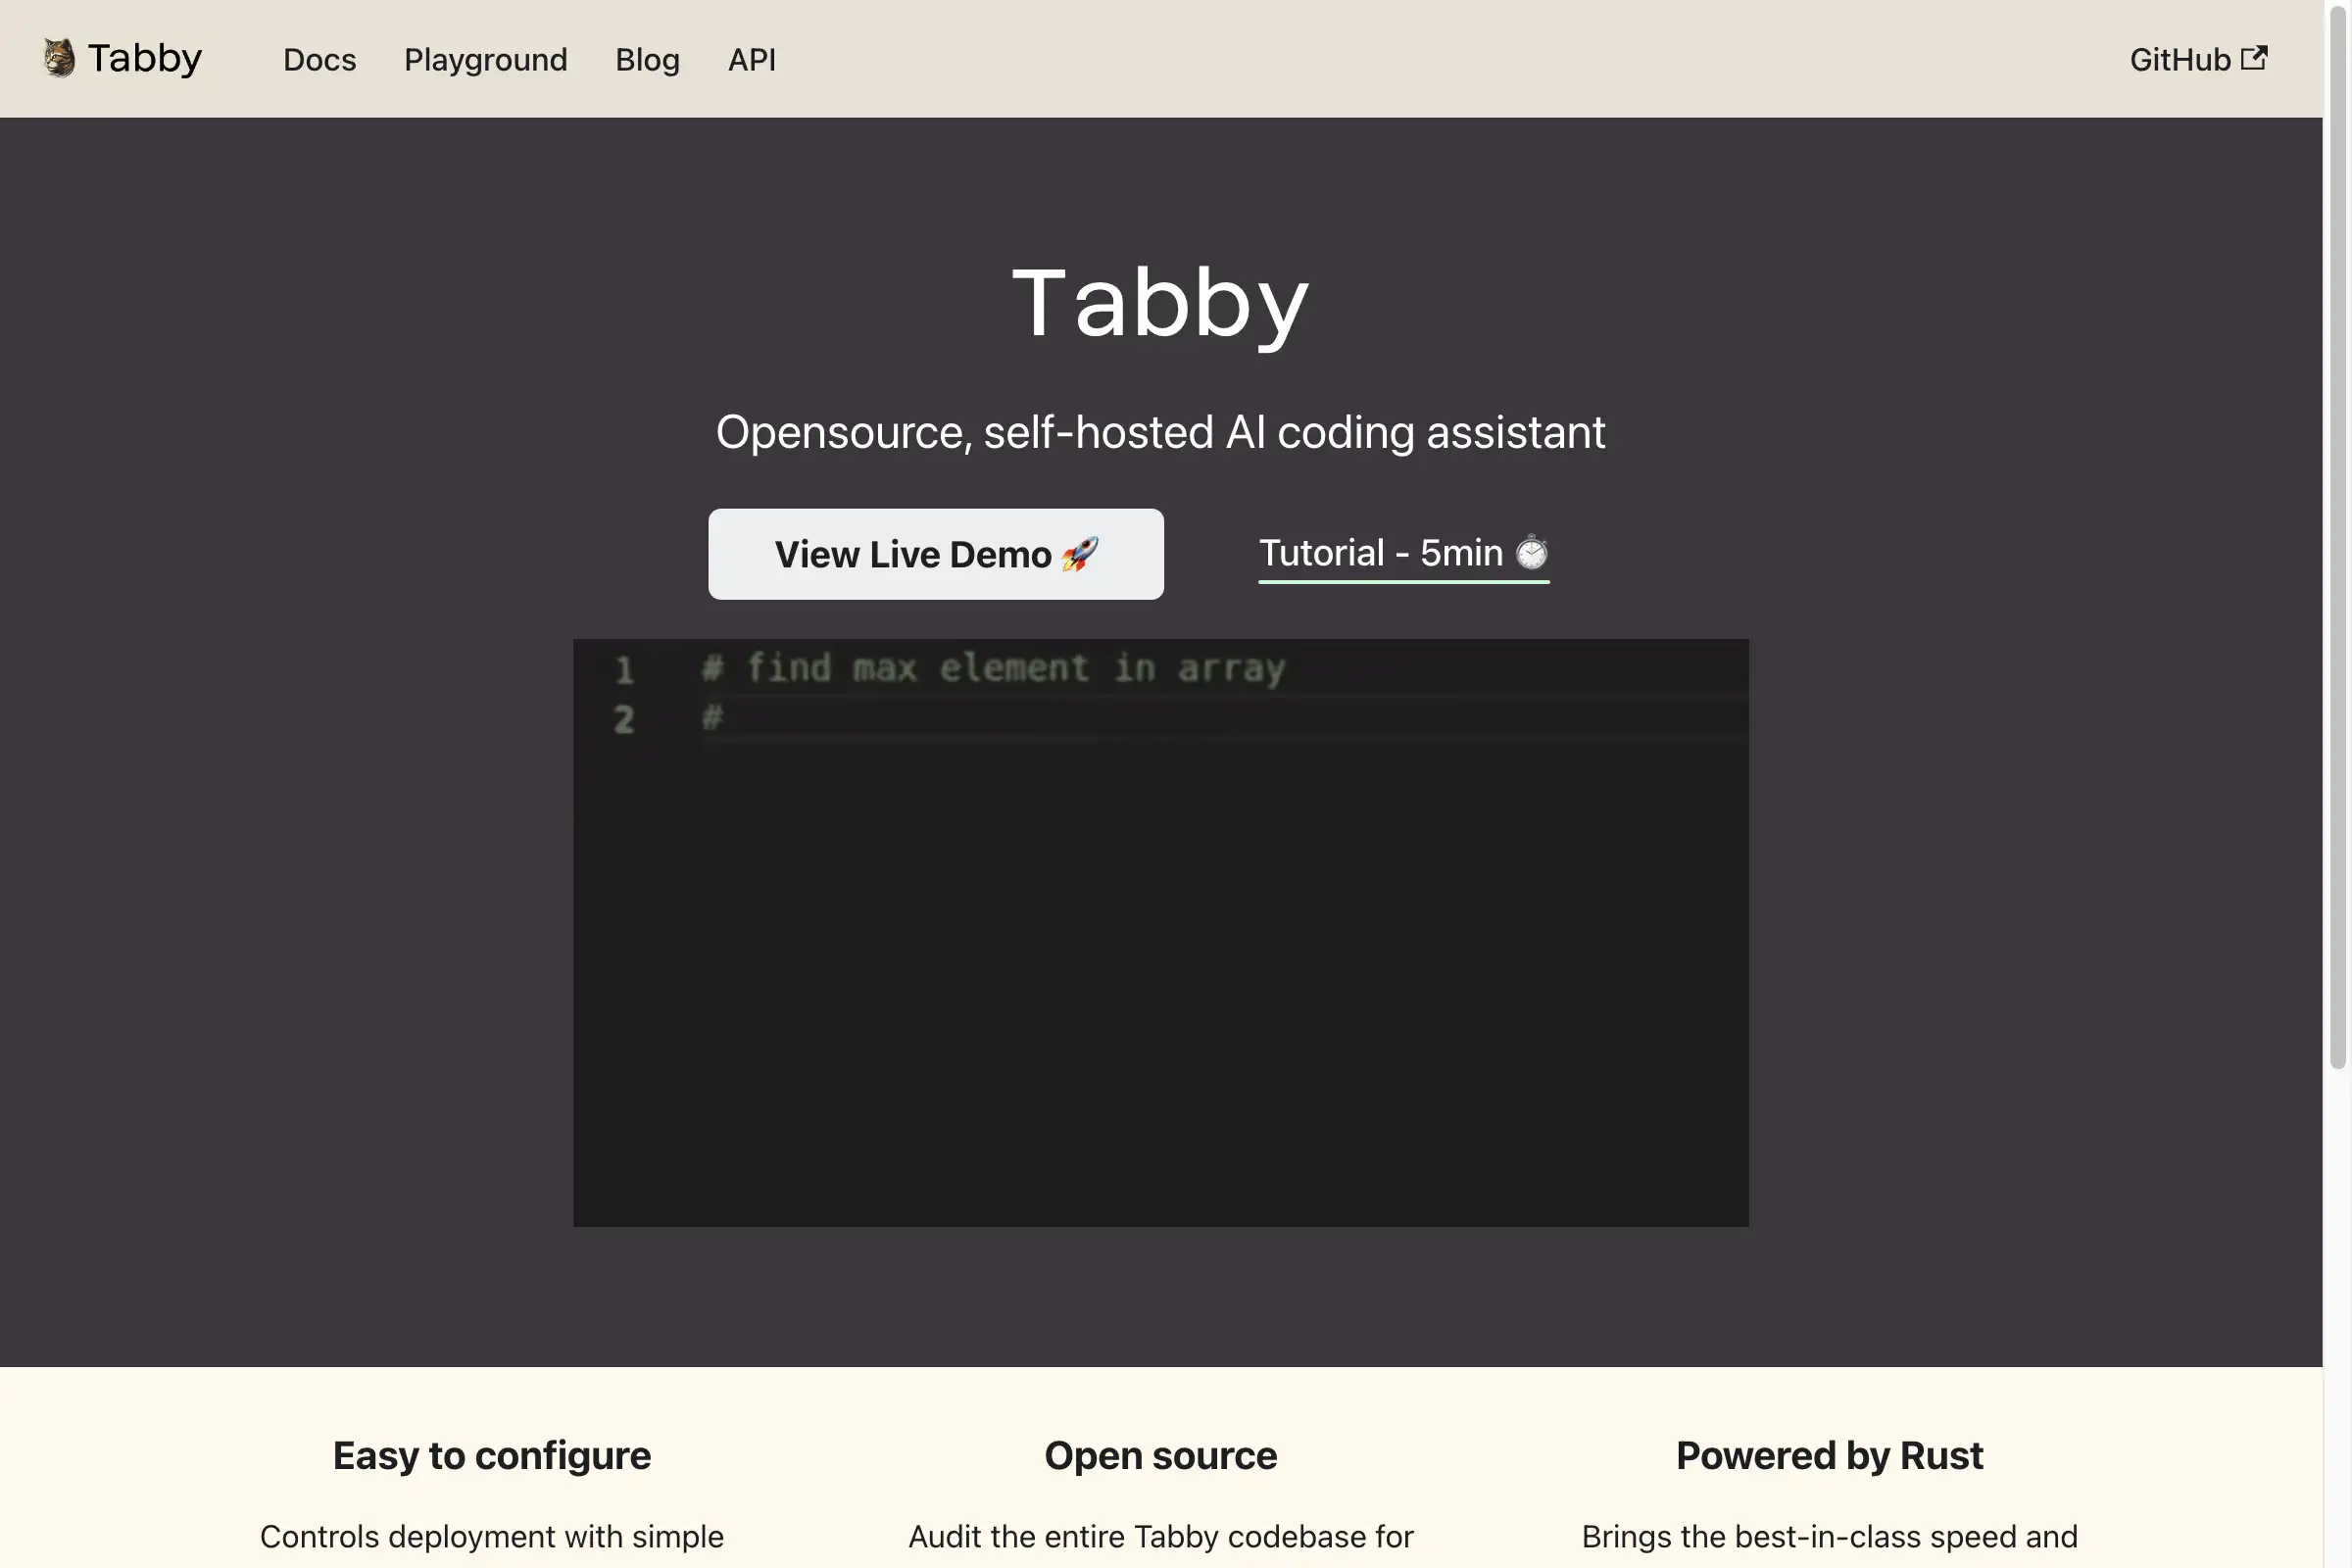 Tabby - Opensource, self-hosted AI coding assistant